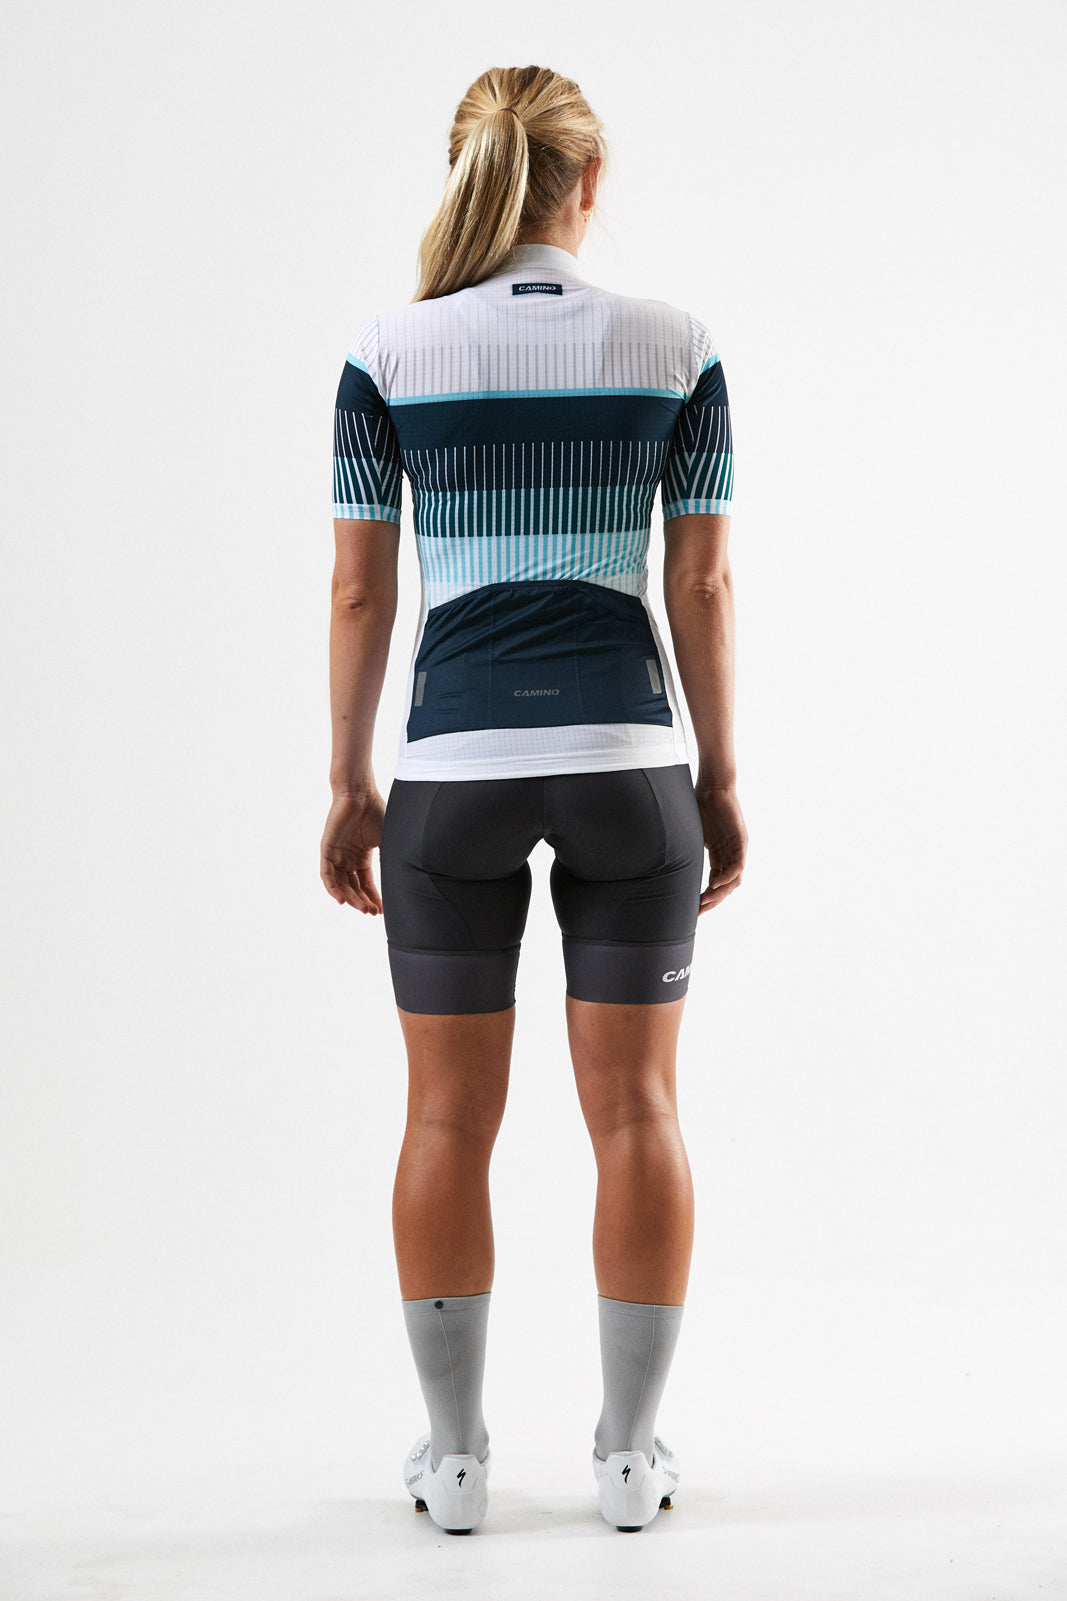 Womens APX Pro Lite Jersey - Turquoise